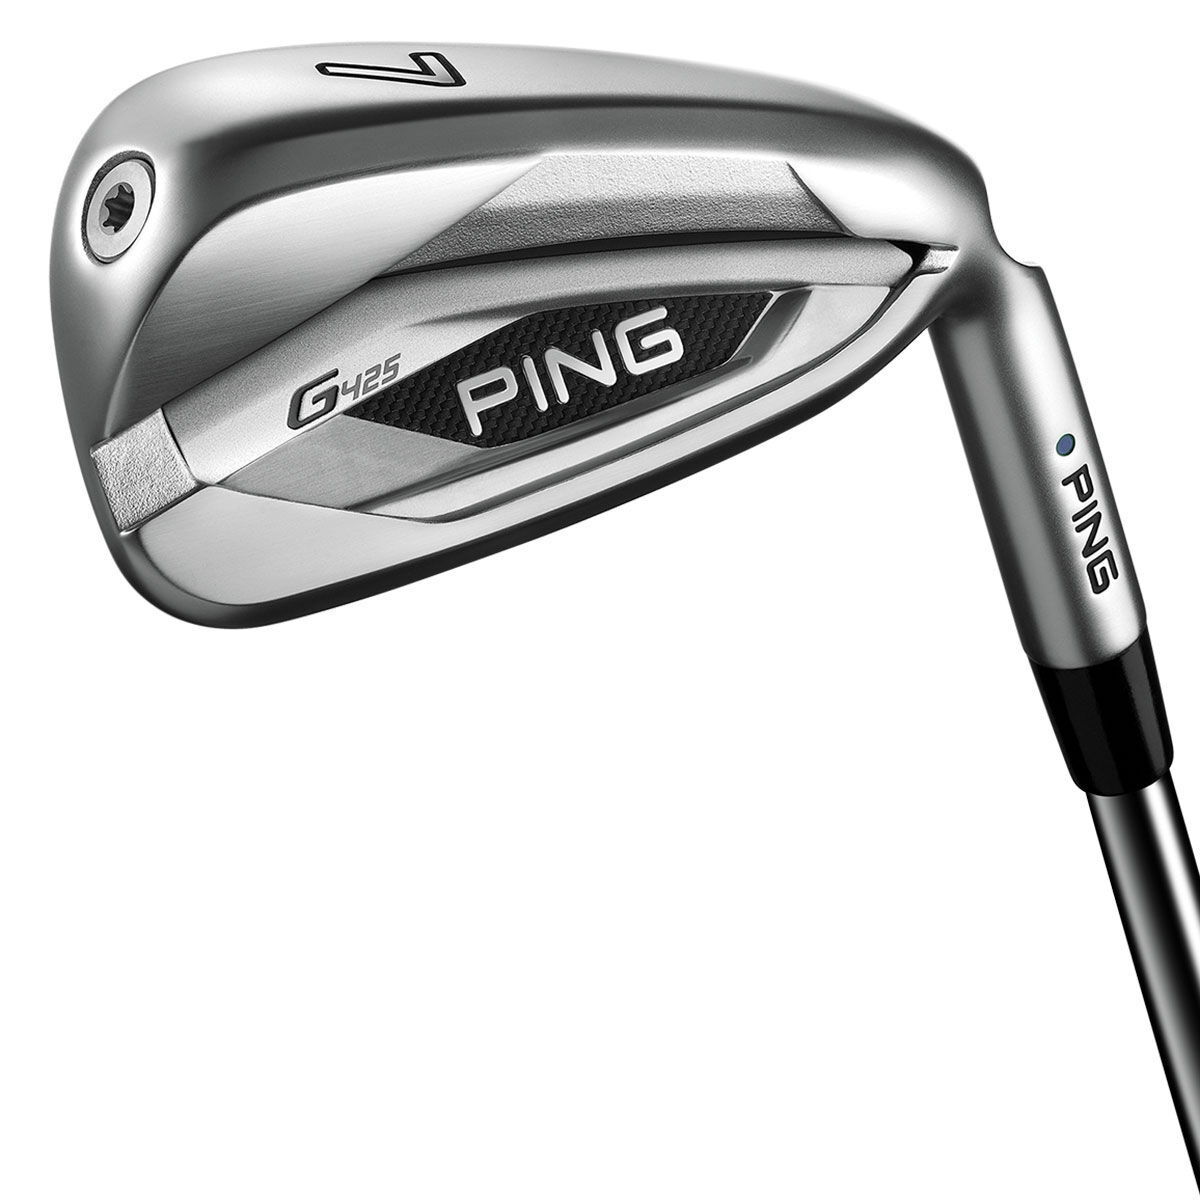 PING G425 Graphite Golf Irons, Mens, 5-pw (6 irons) 1° upright, Right hand, Graphite, Regular | American Golf von Ping